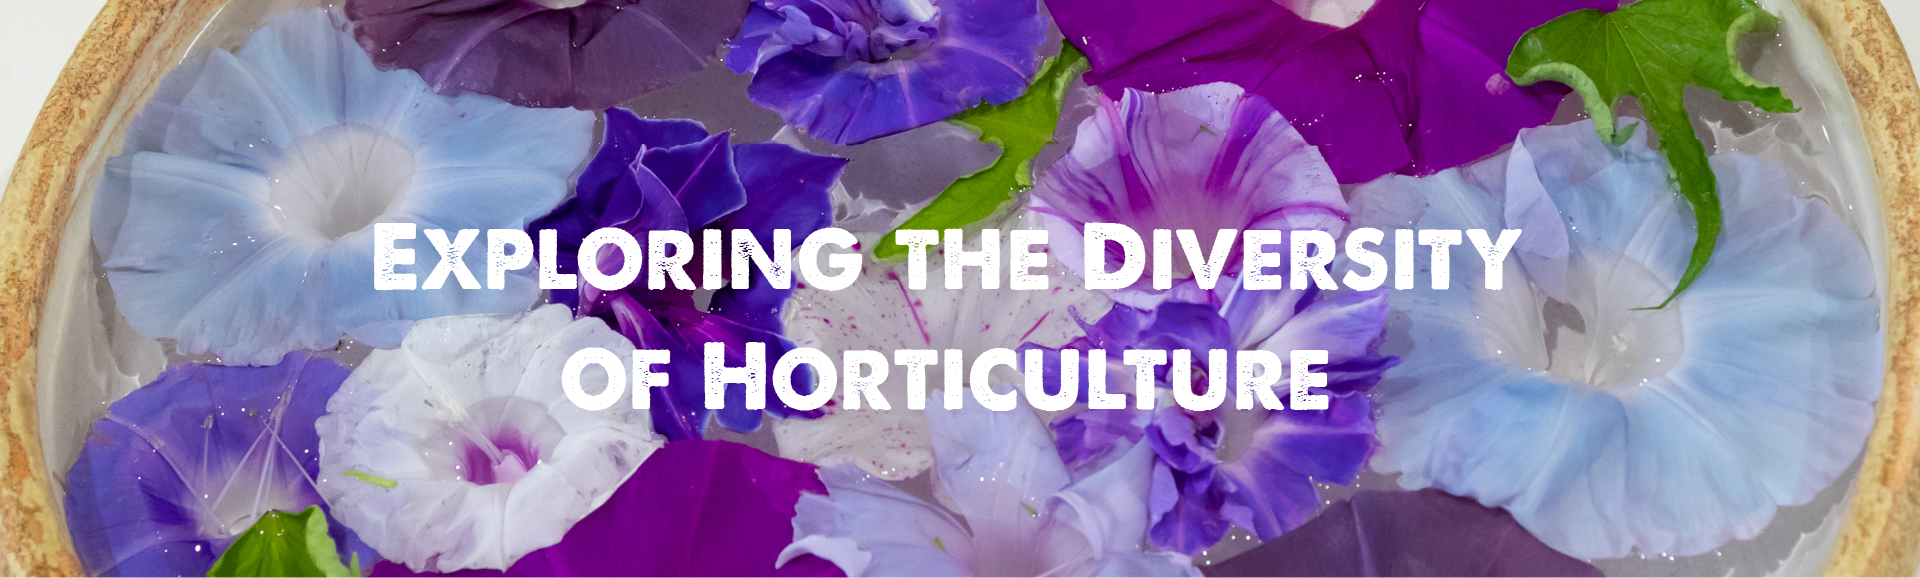 Exploring the Diversity of Horticulture